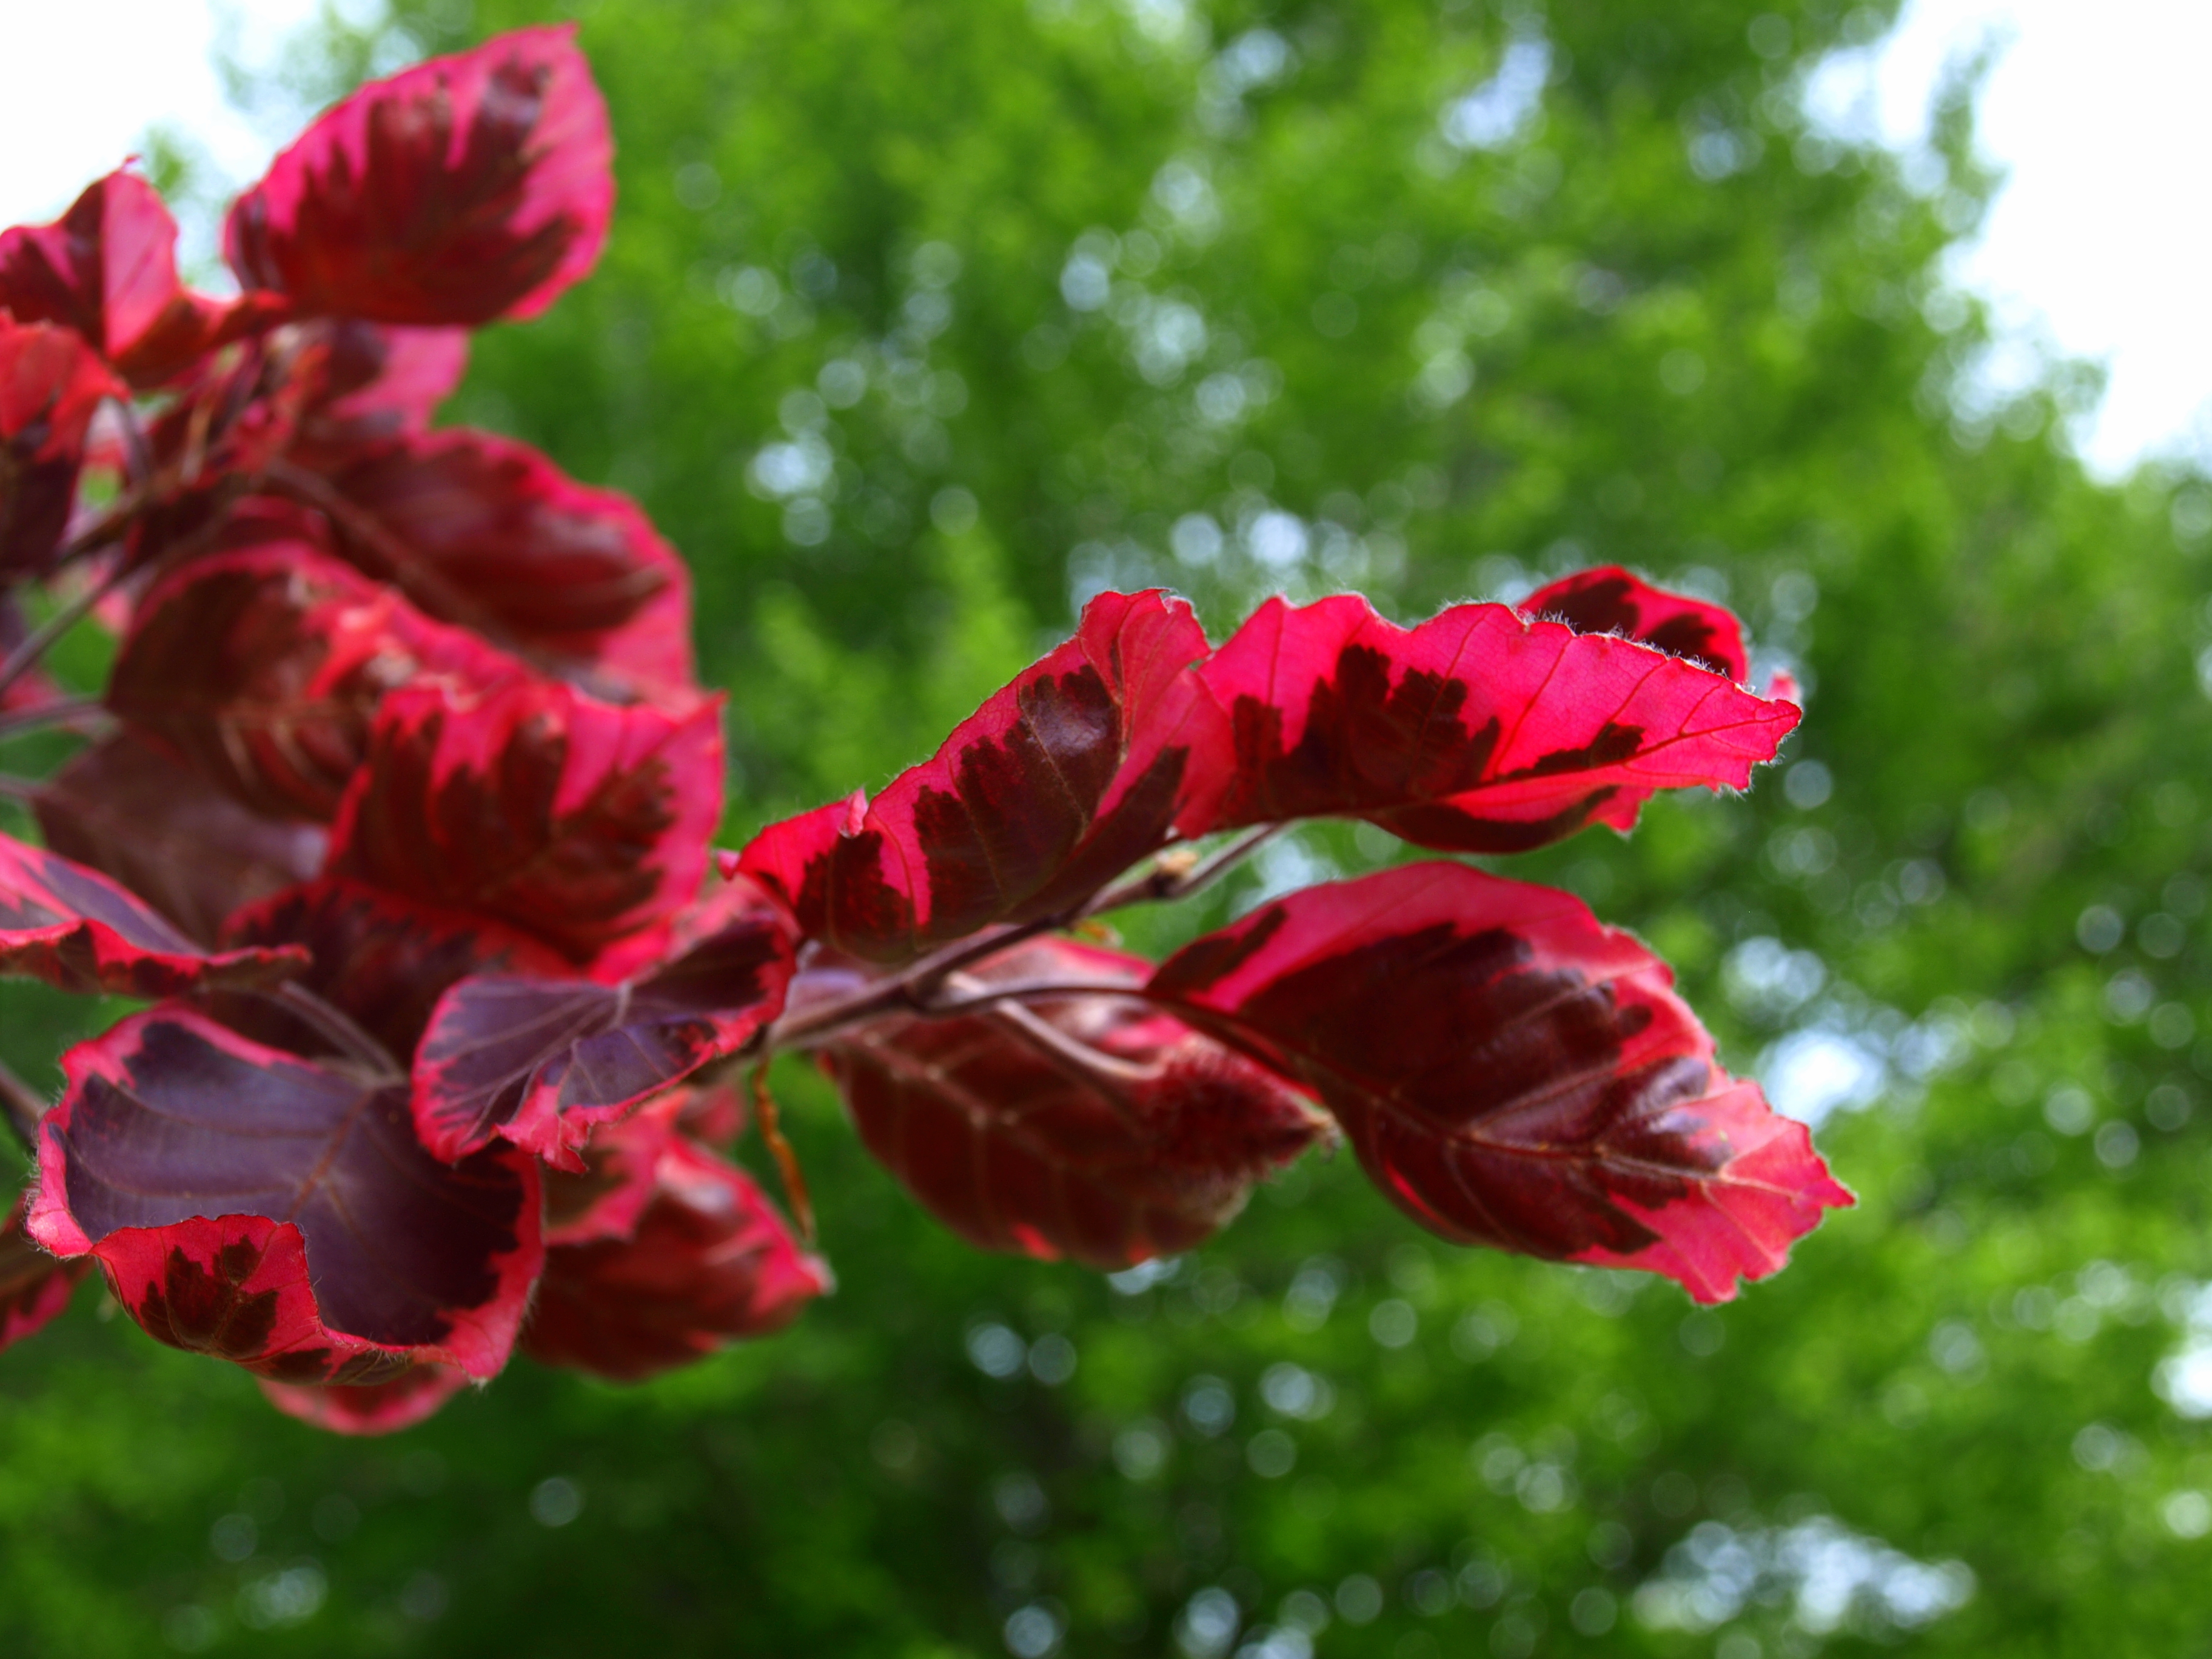 Maroon Leaves of the European Tri-Color Beech Tree